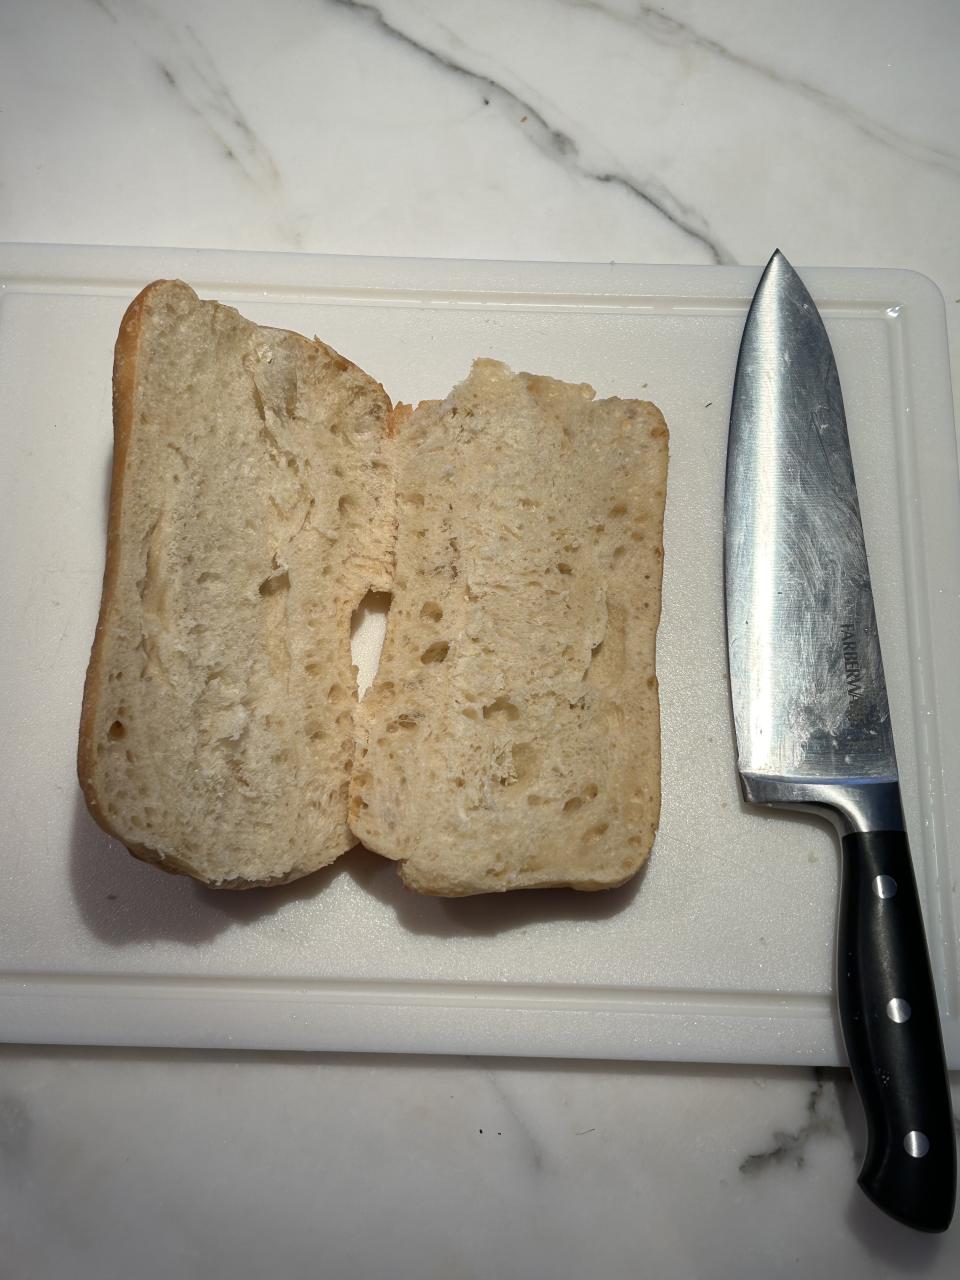 The sliced bread on a cutting board next to a knife